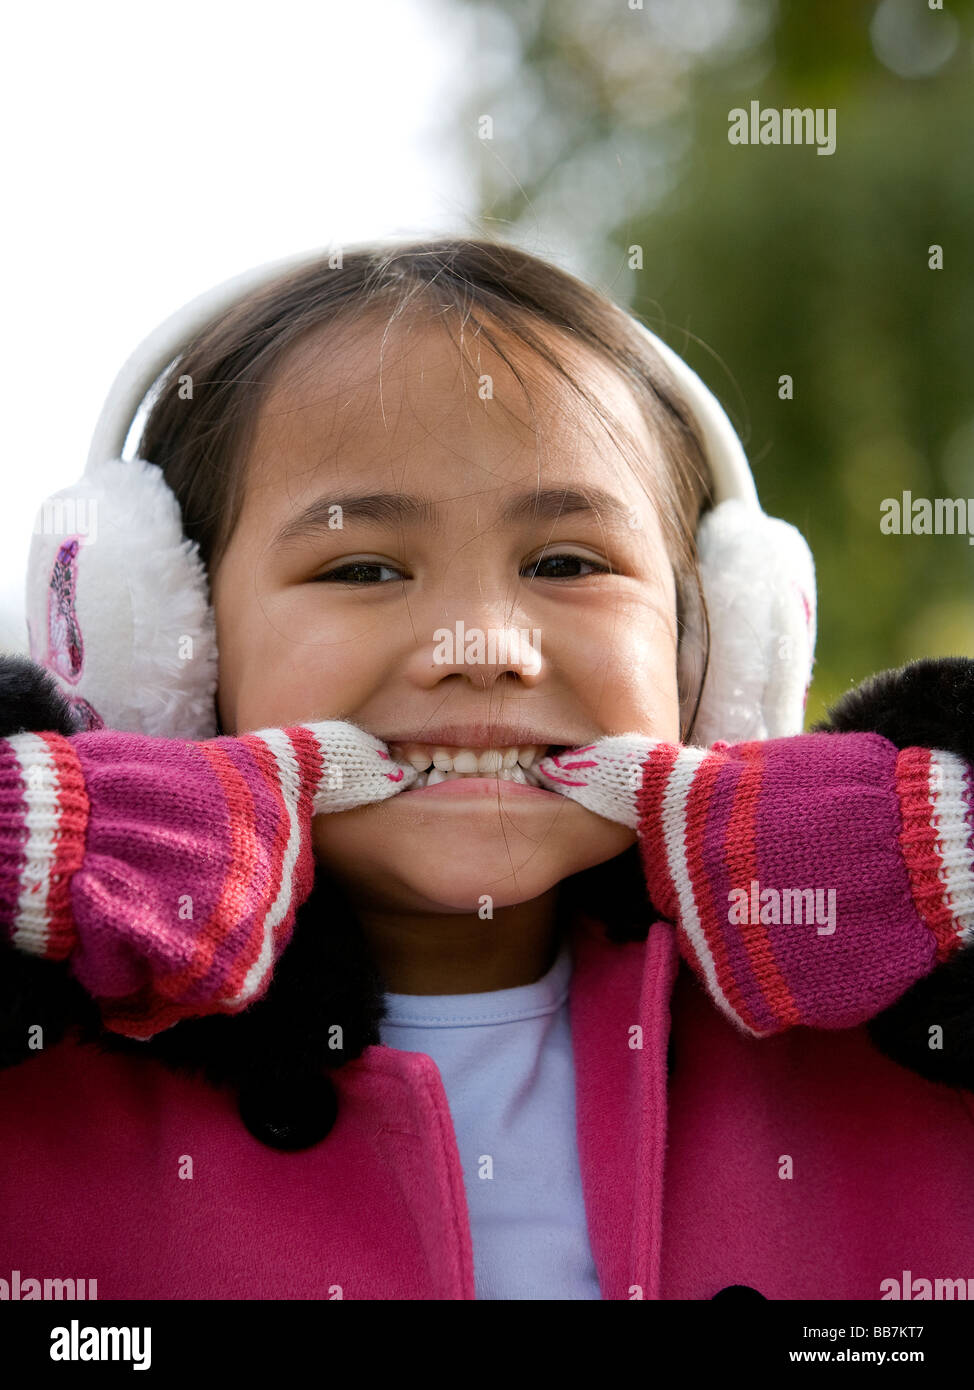 Young half-Thai girl wearing gloves and ear muffs pulls a face for the camera Stock Photo